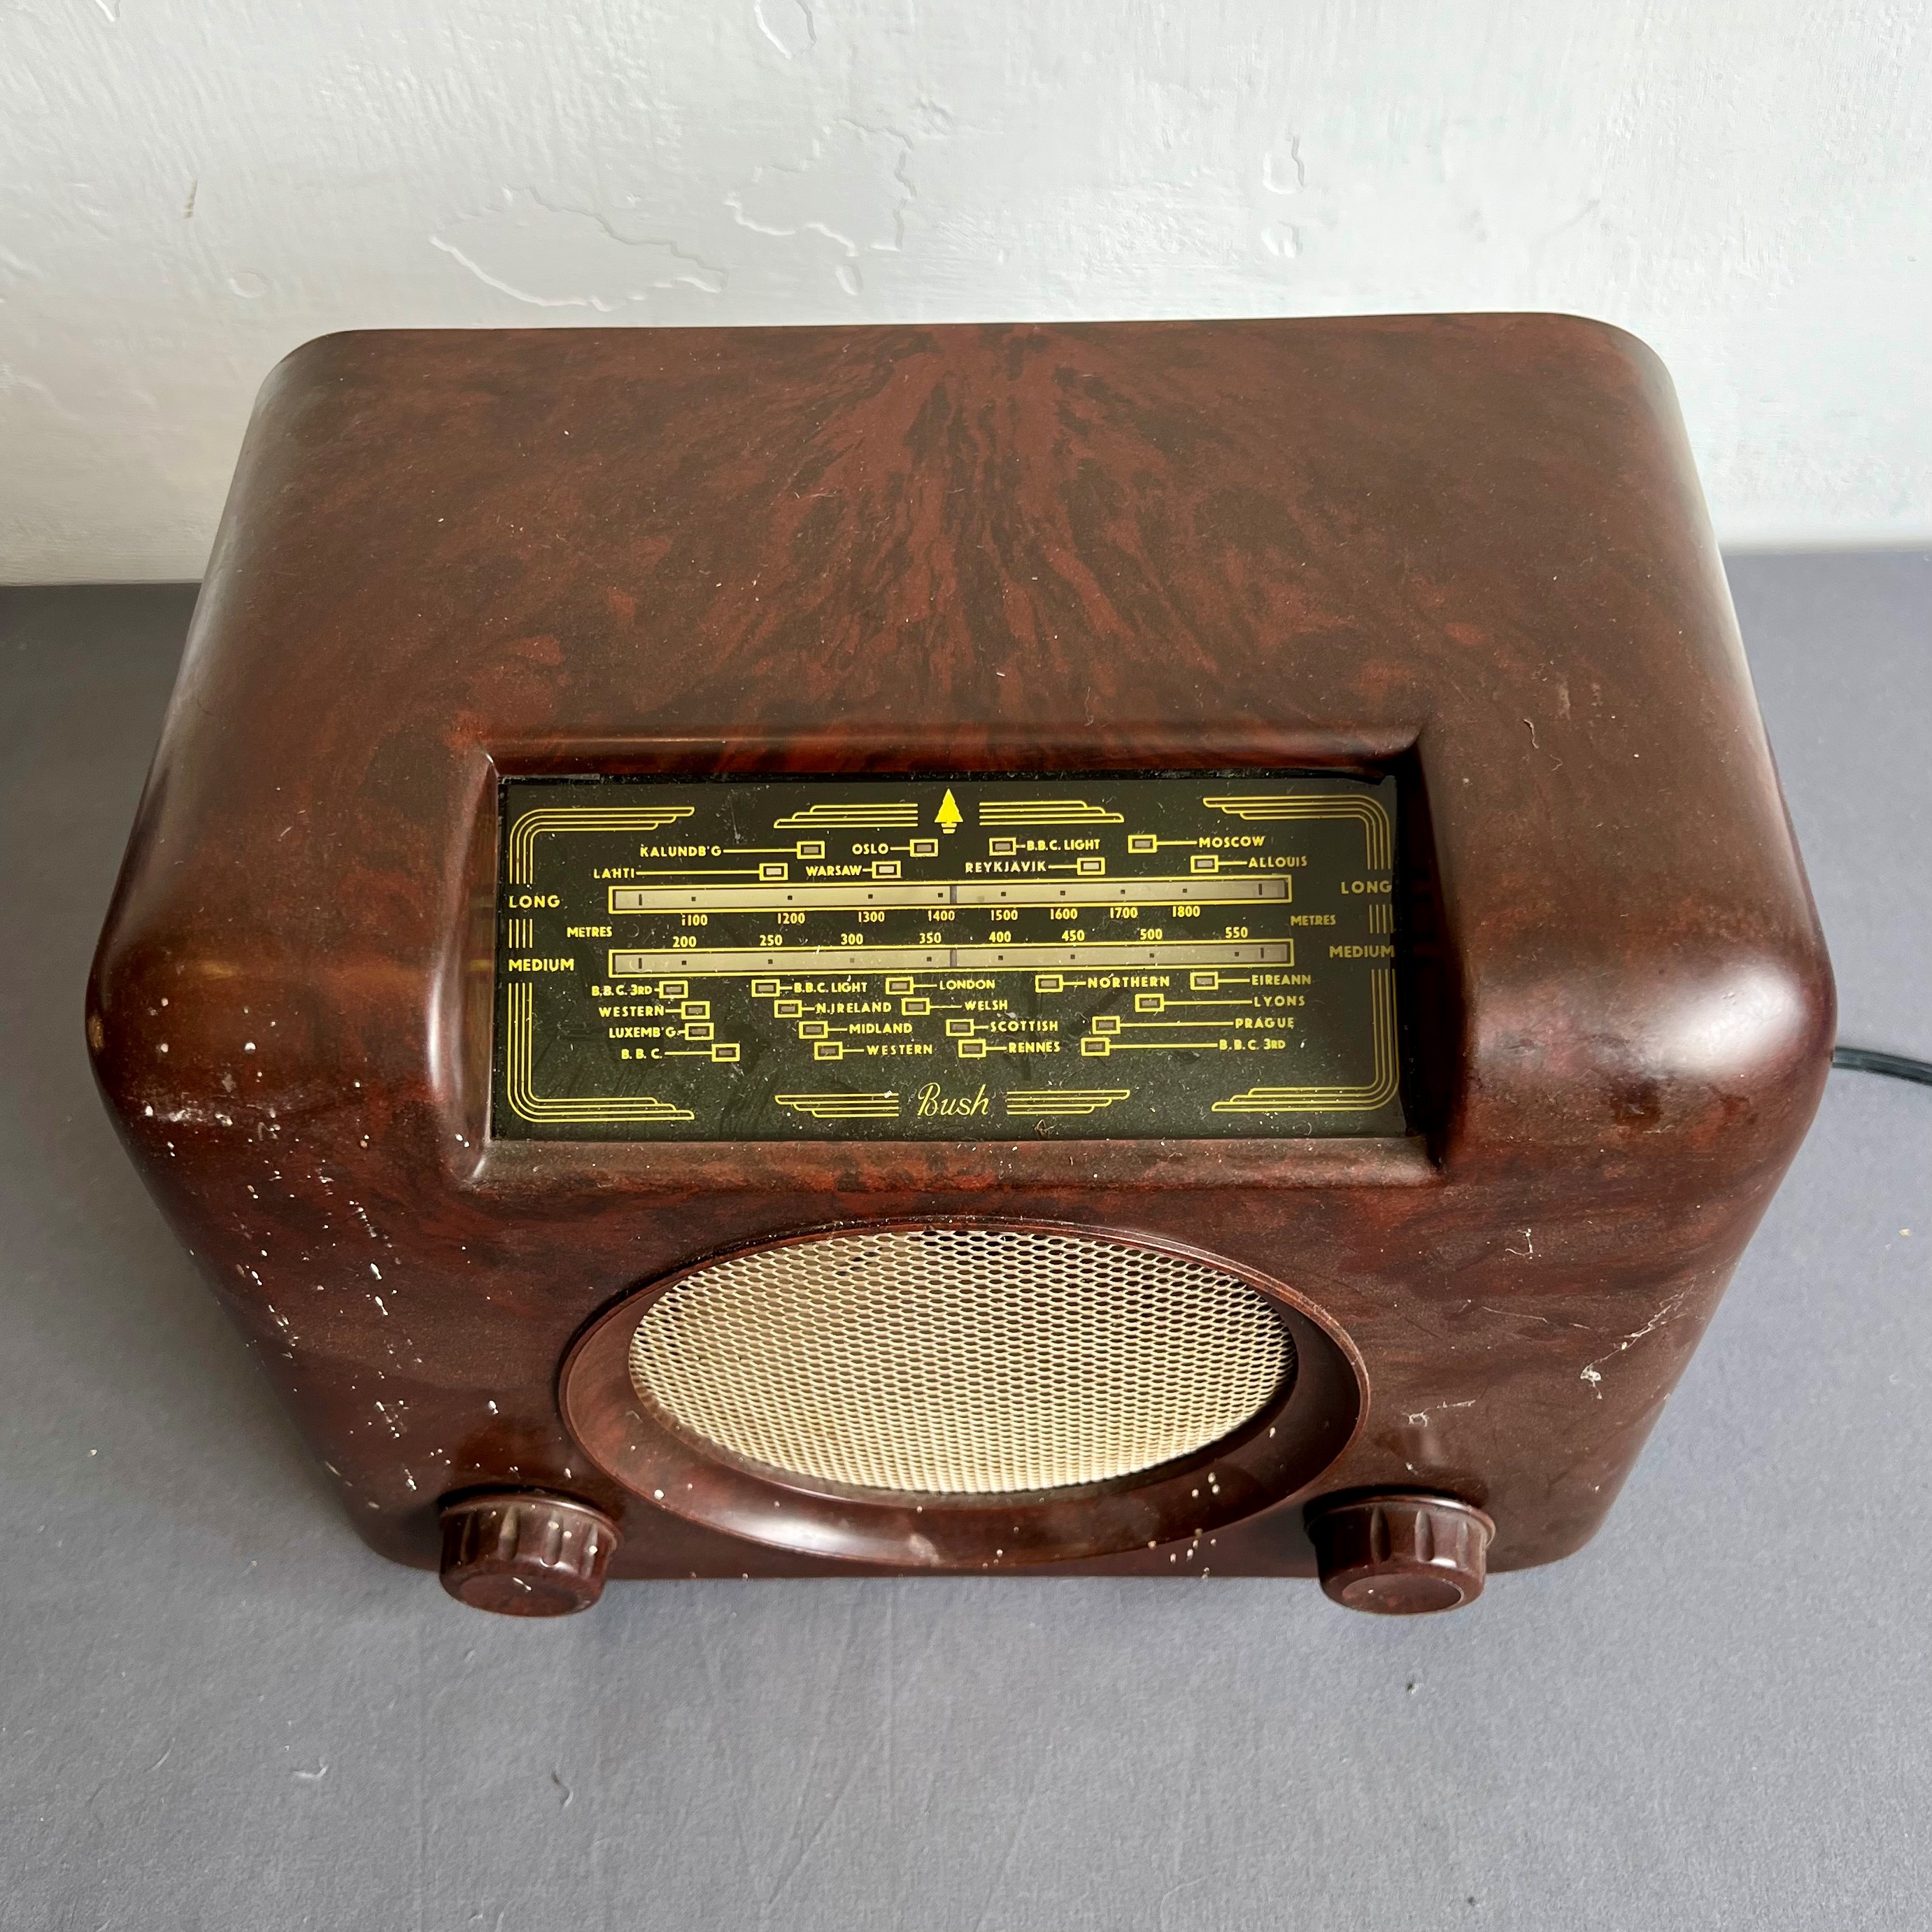 Two Bush bakelite radios - 1950s, comprising a DAC 90A and a DAC 10, both with brown bakelite cases, - Image 7 of 8